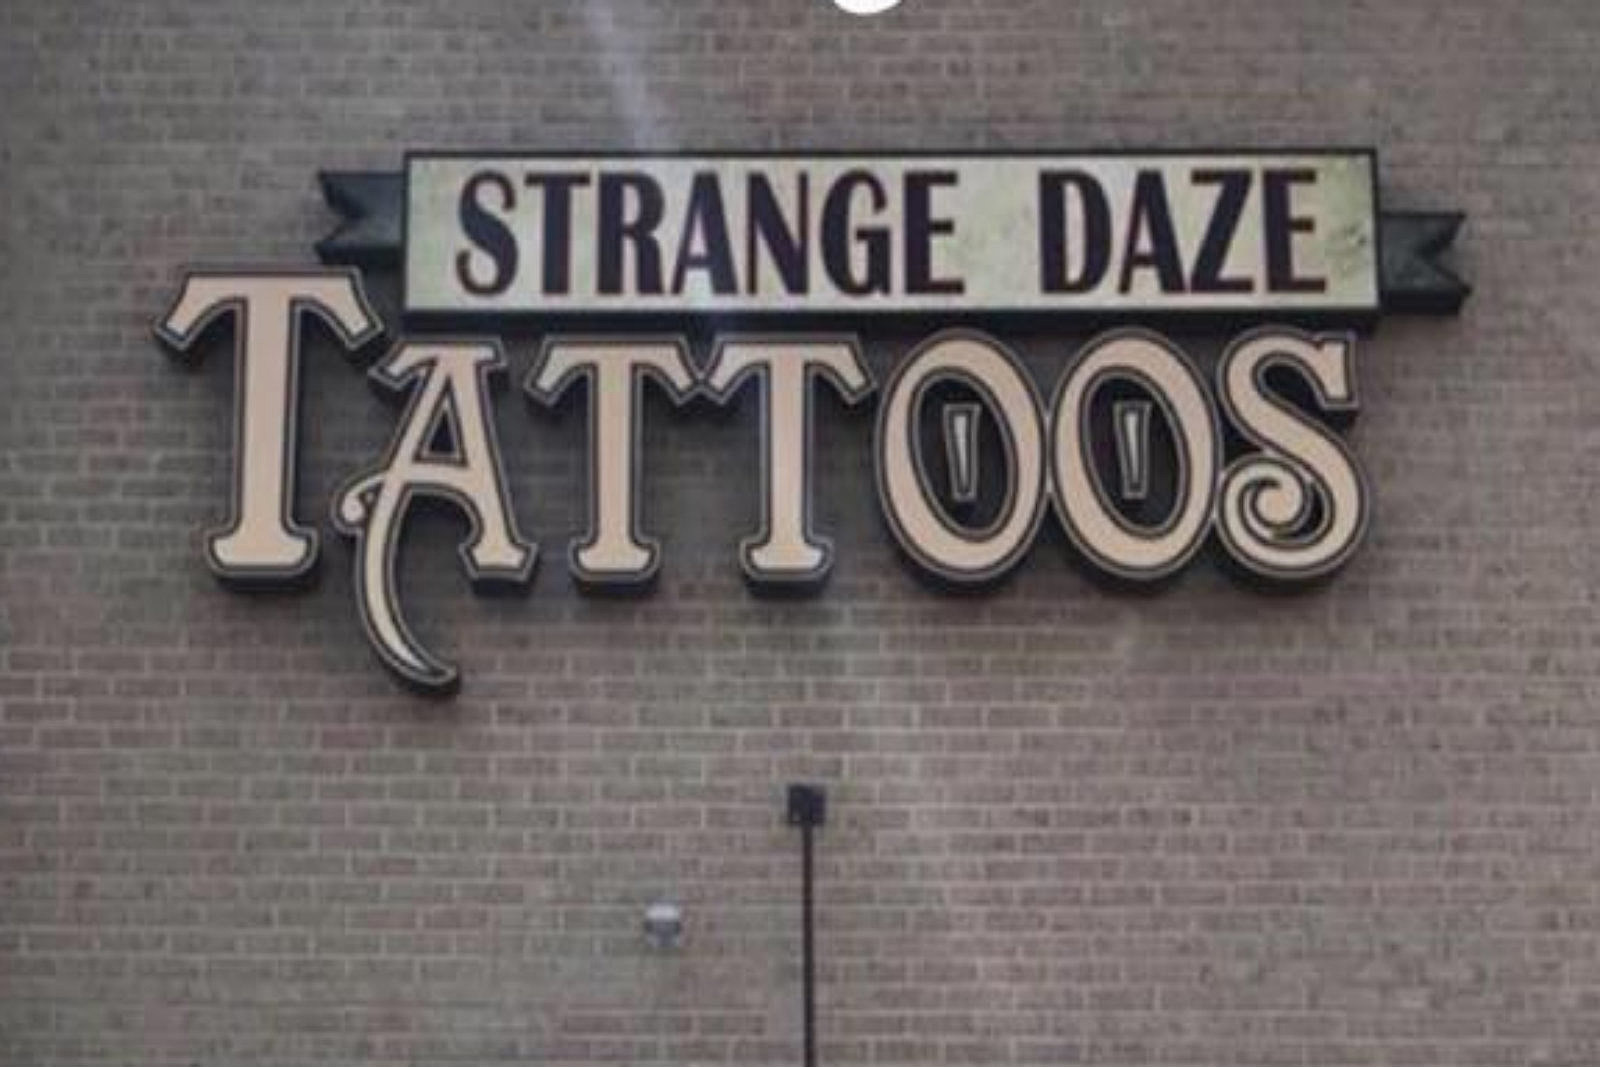 Strange Daze Tattoos  Good Afternoon Everyone We are open today from 12  pm to 8 pm A couple of our artists have some open availability for  walkins First come first serve